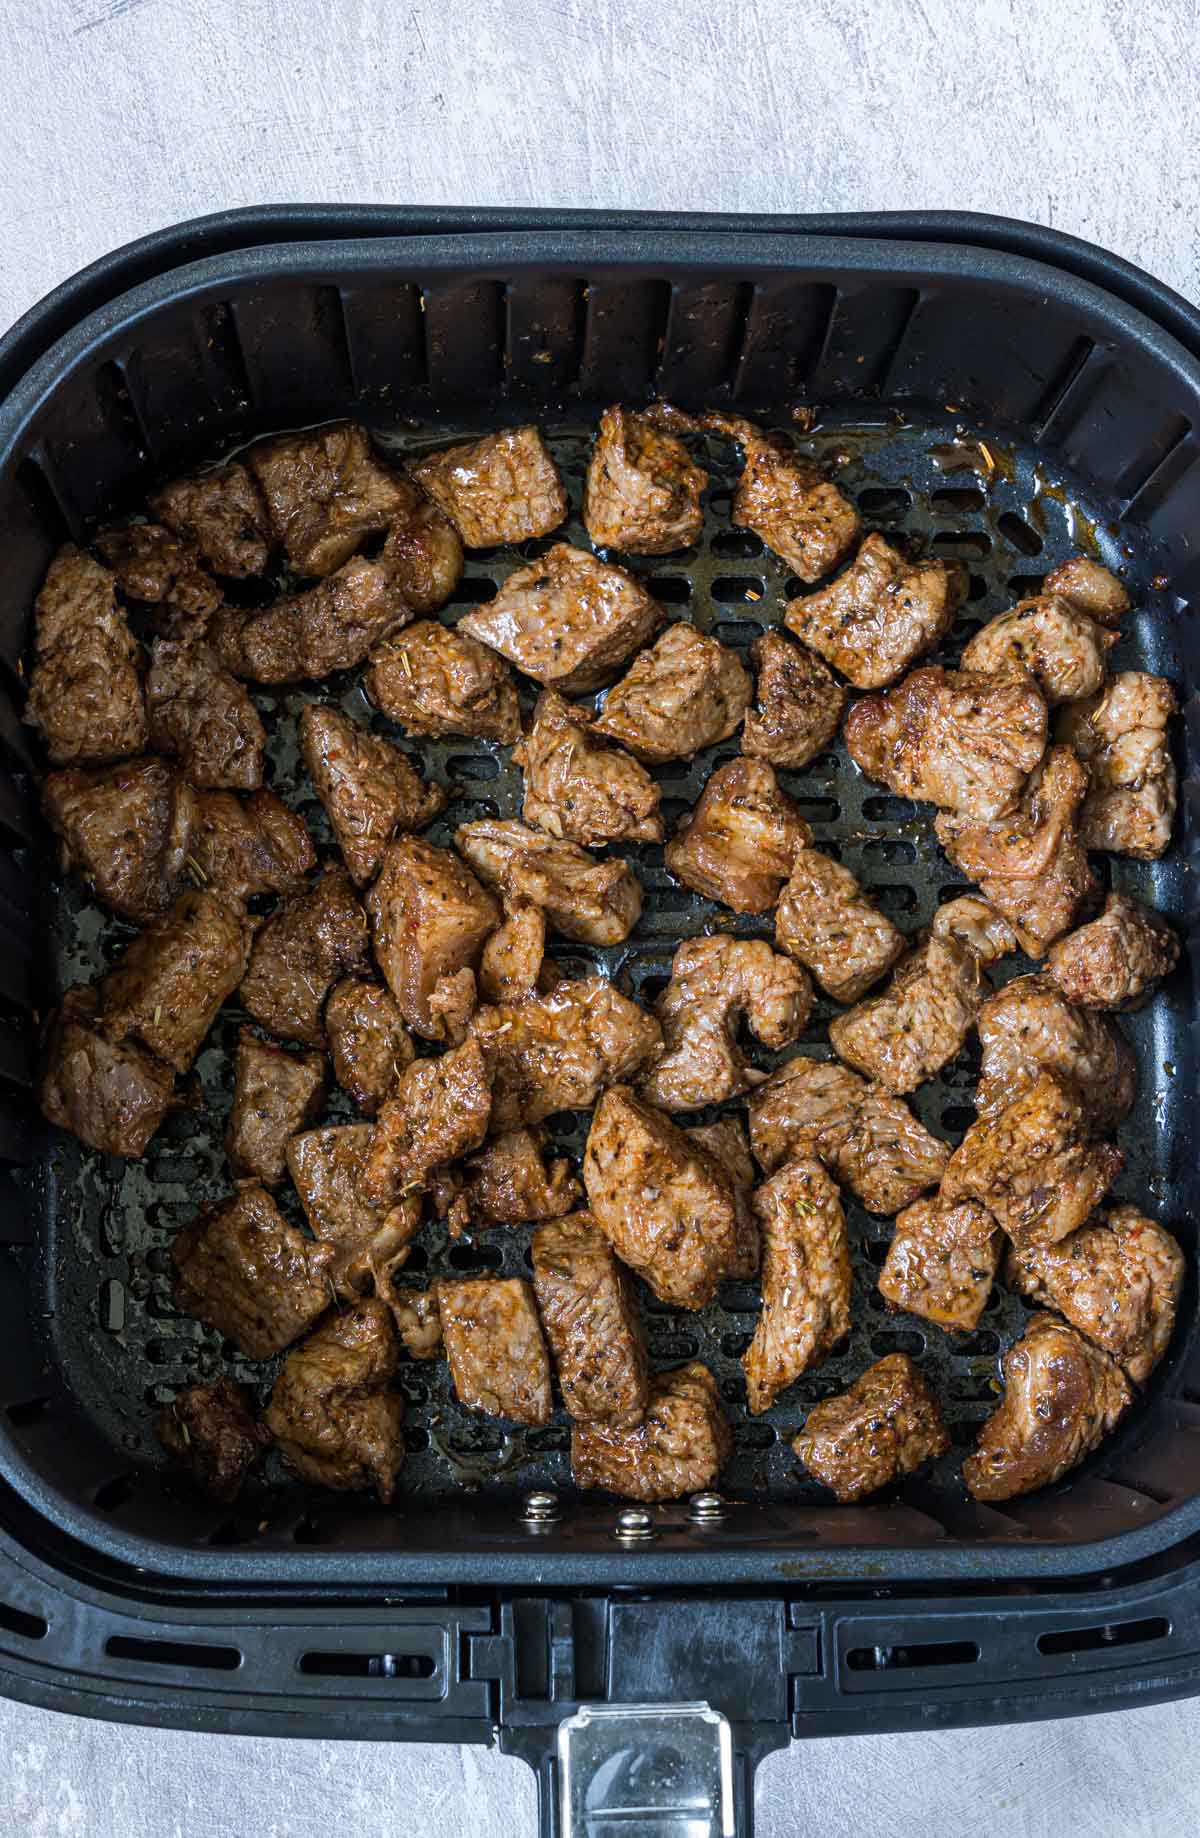 top down view of the completed steak bites in air fryer basket